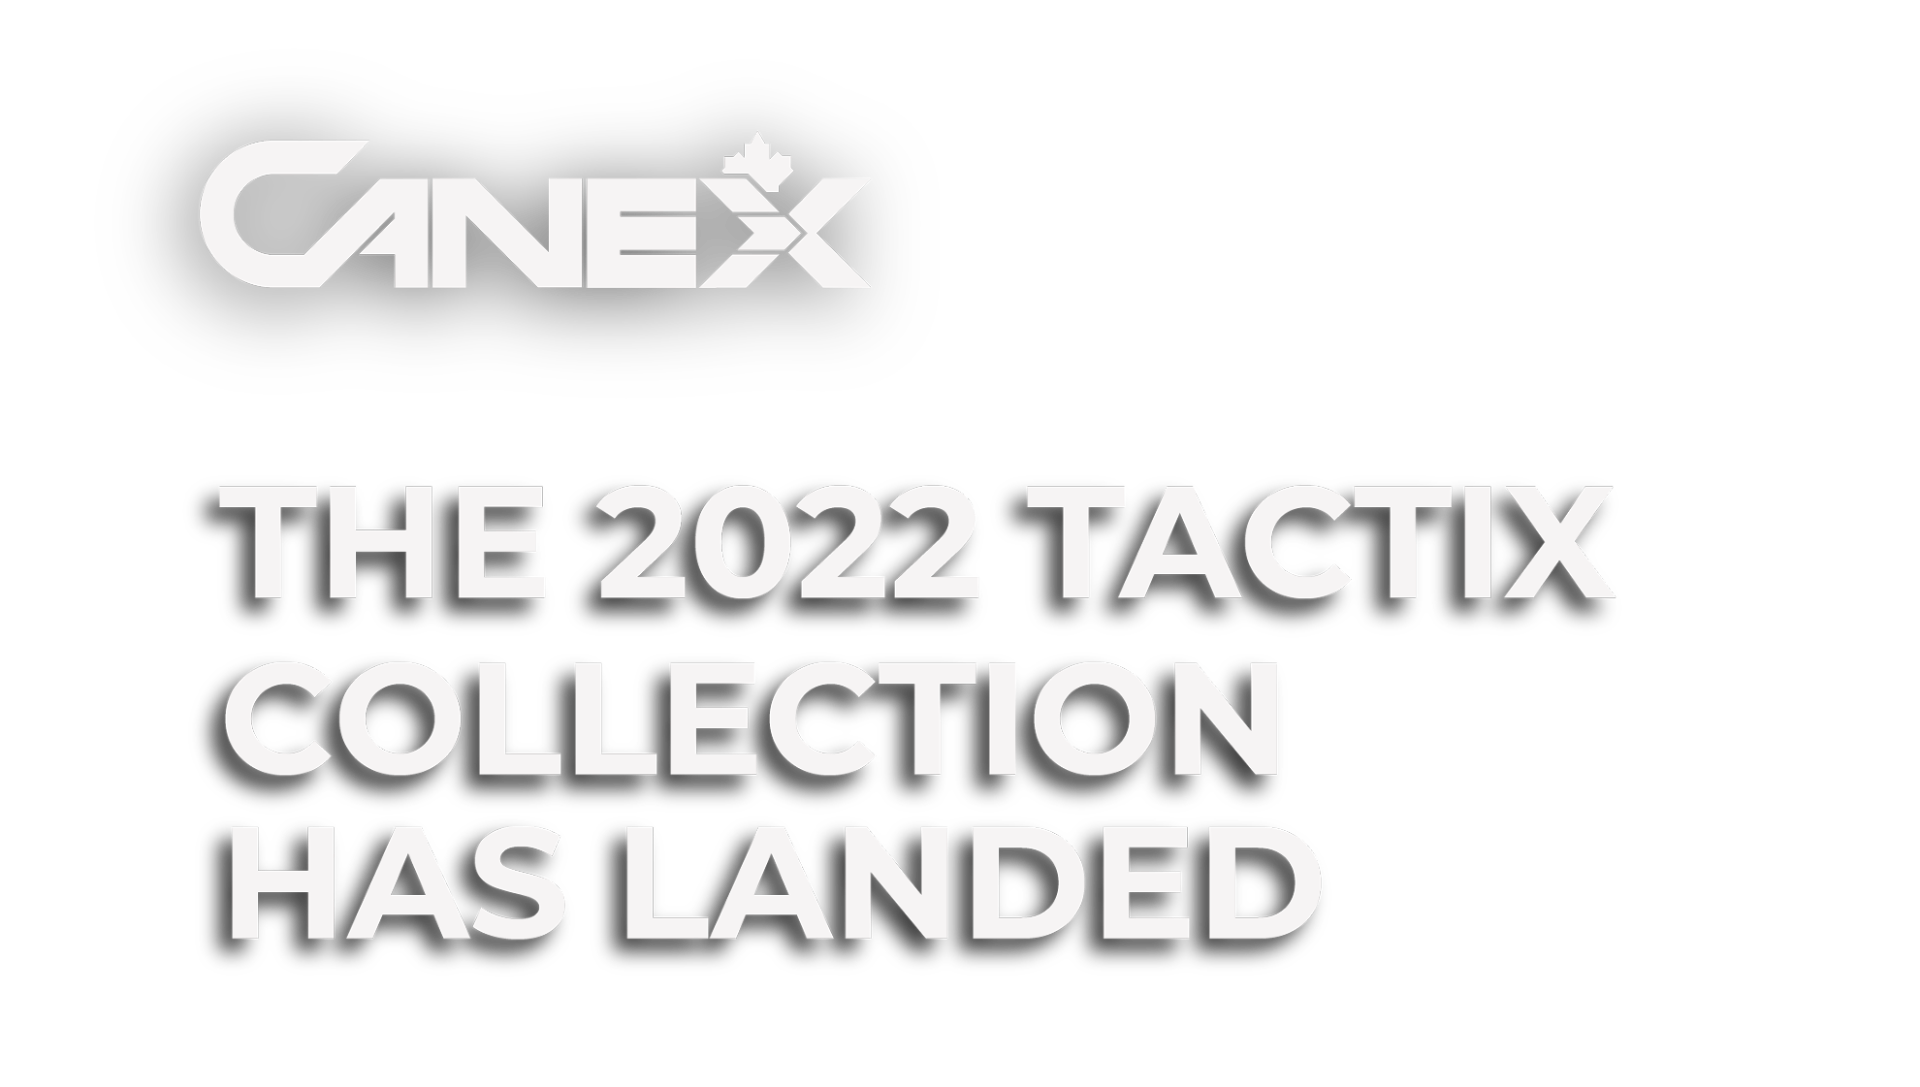 The 2022 Tactix Collection Has Landed